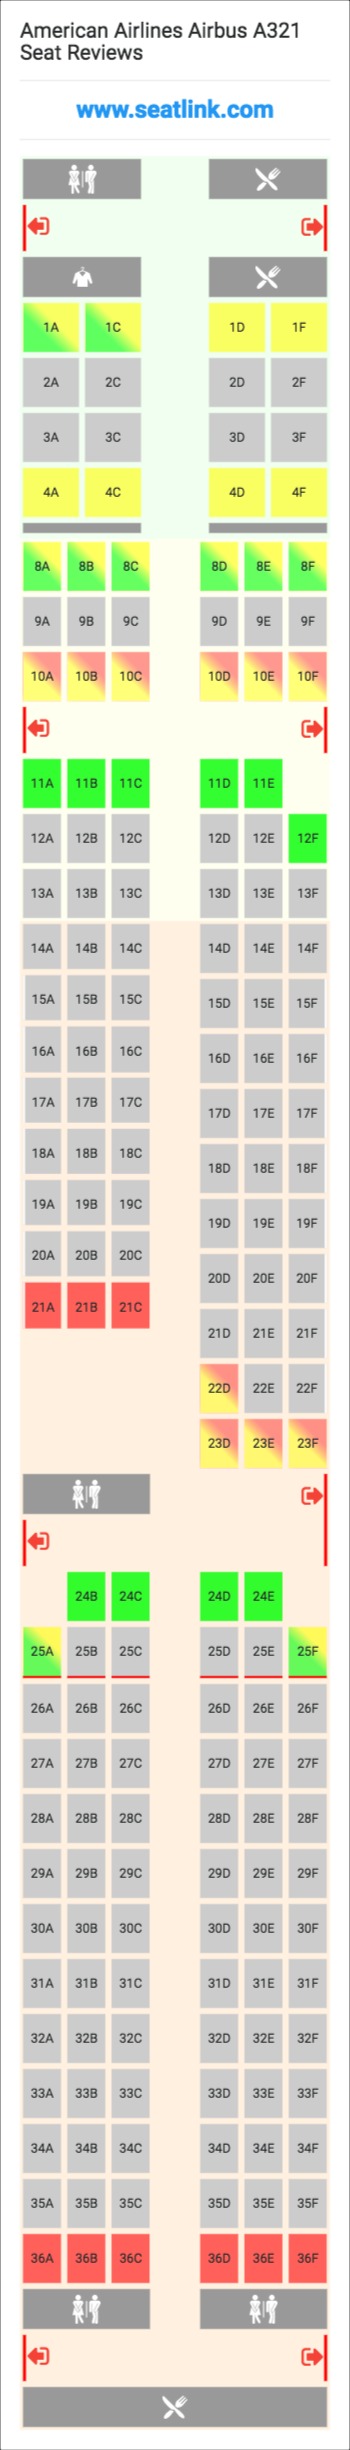 American Airlines Airbus A321 (321) Seat Map